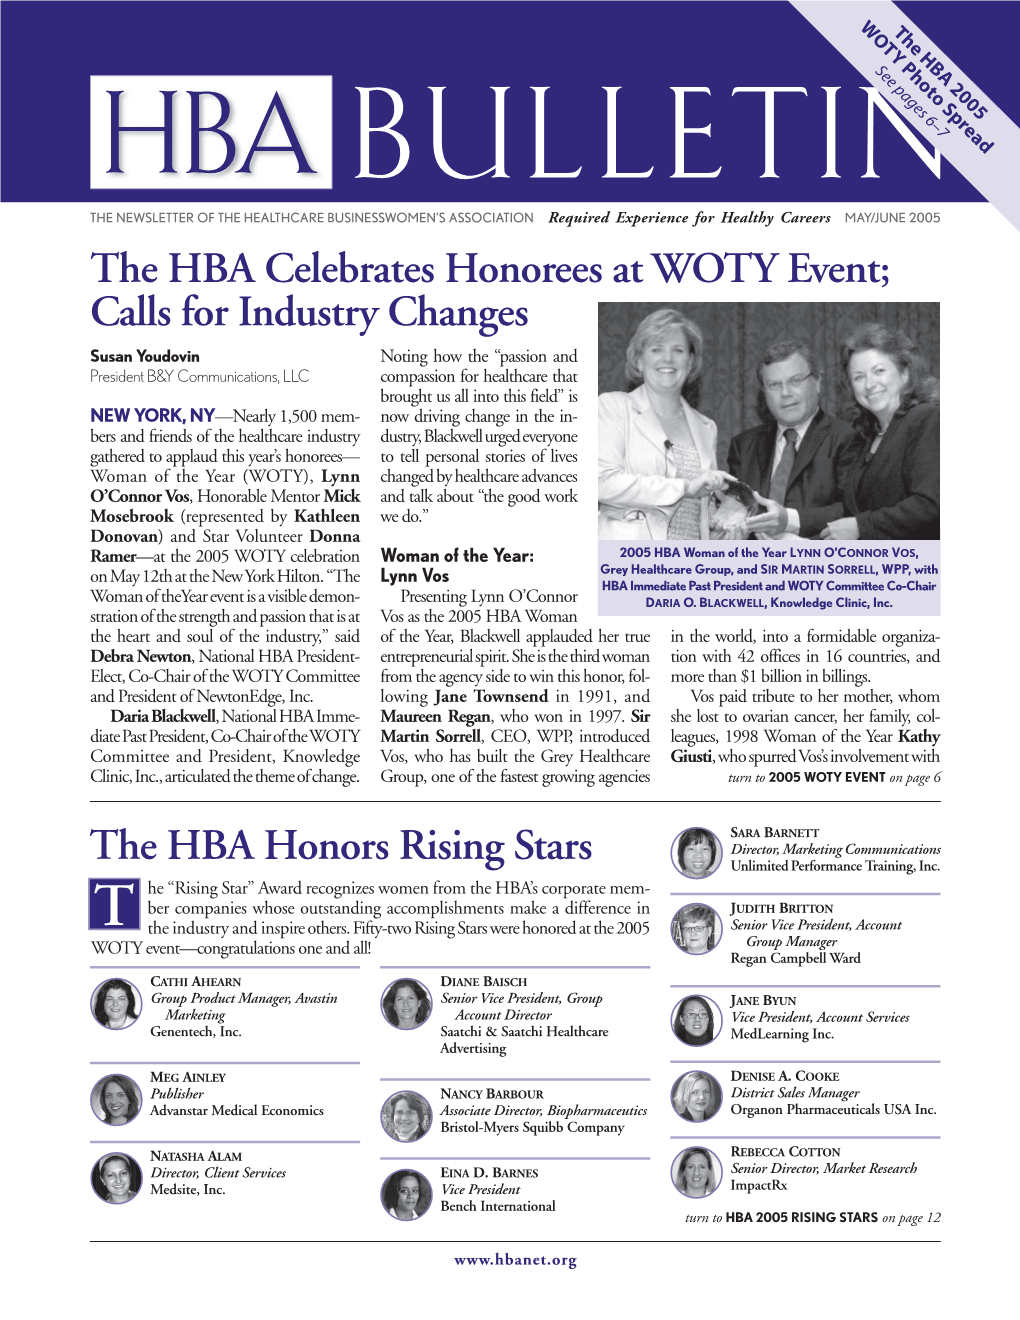 Calls for Industry Changes the HBA Honors Rising Stars